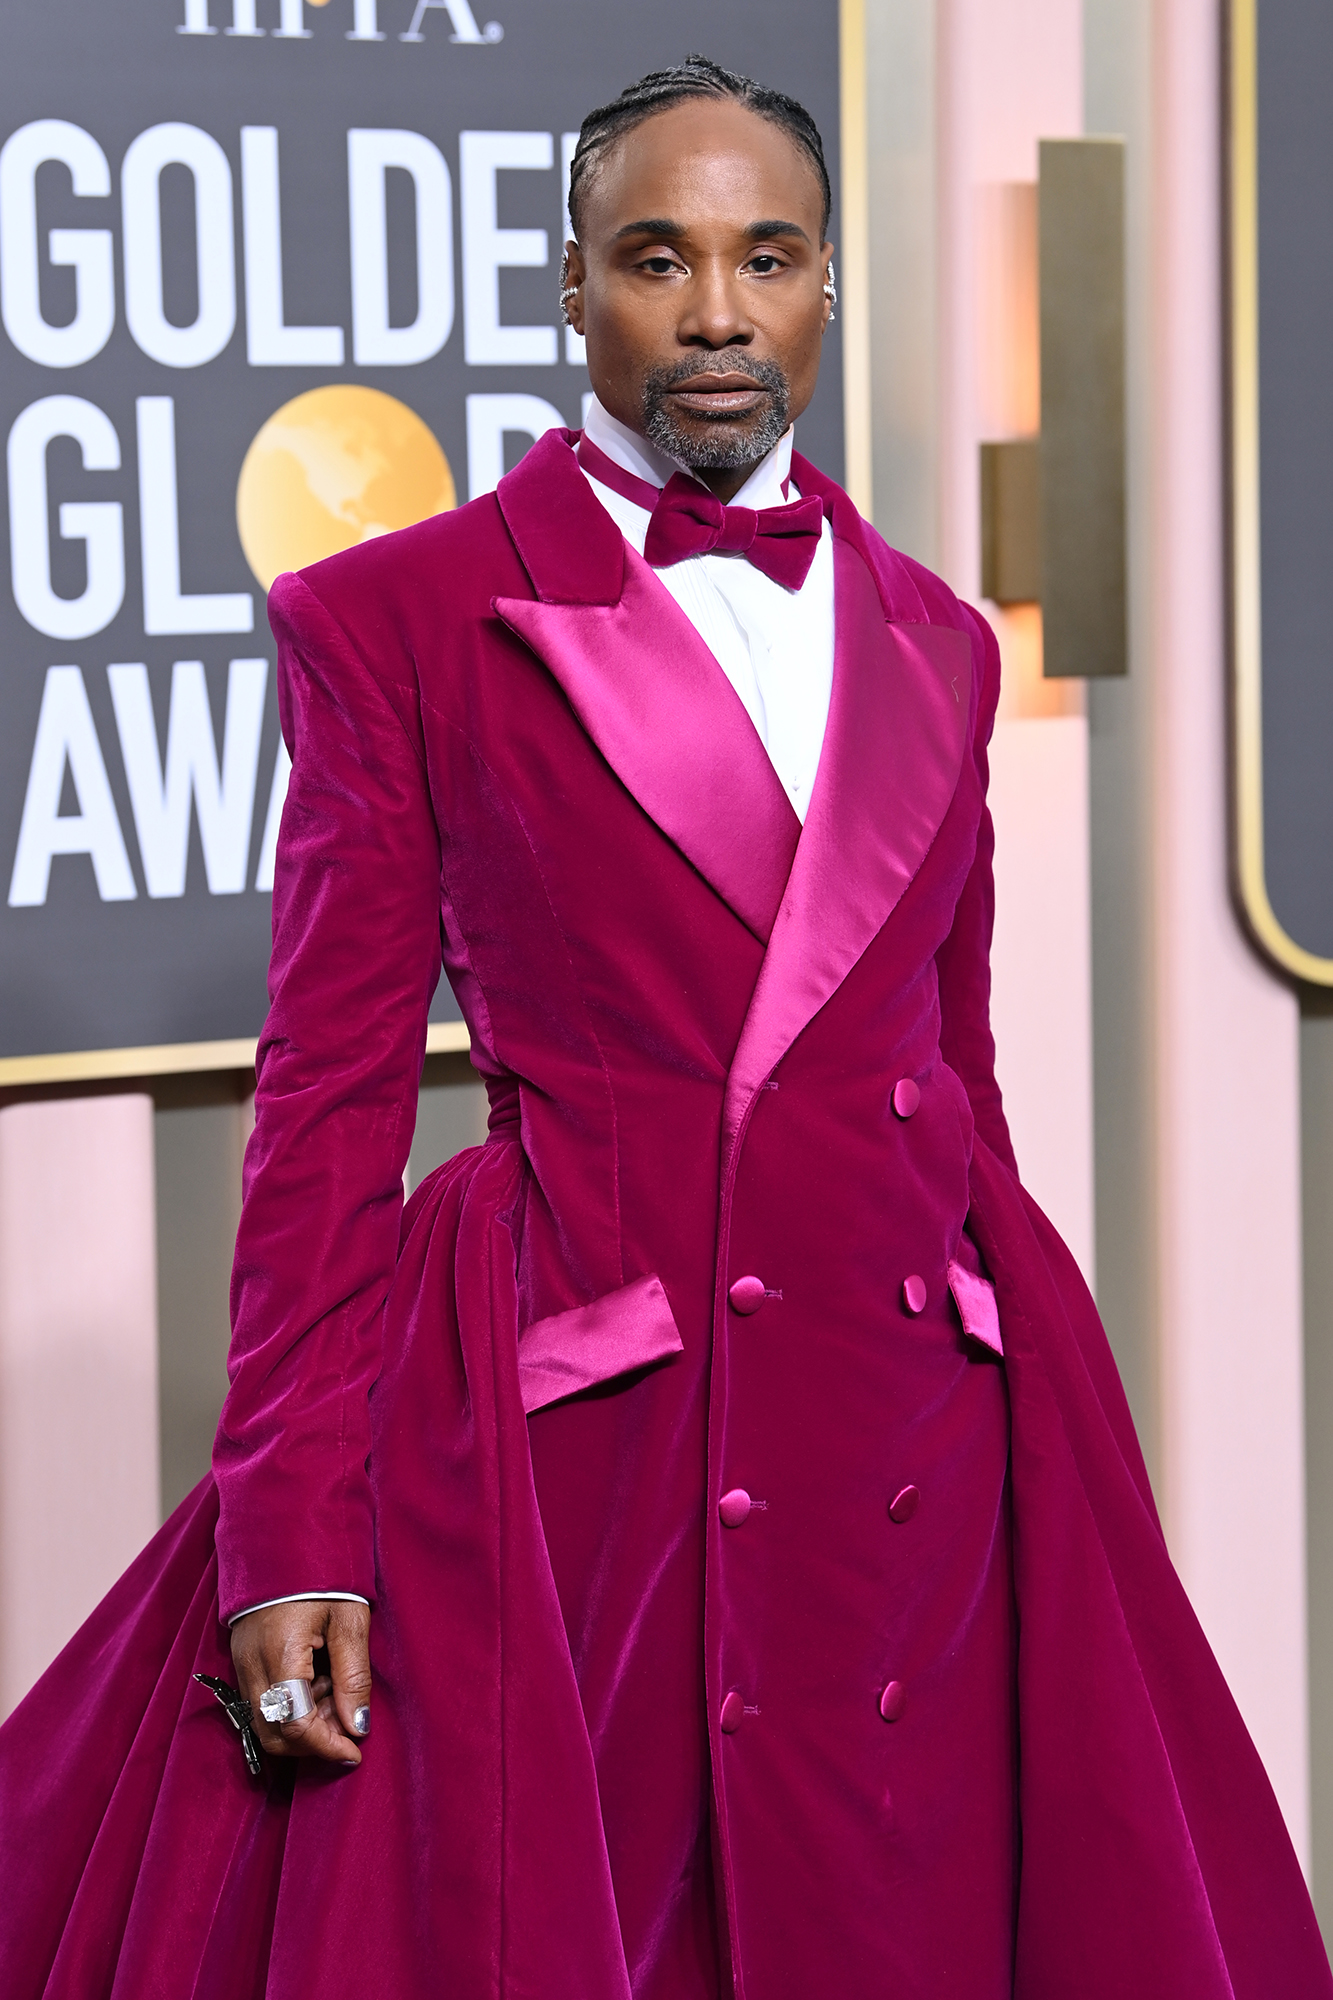 Billy Porter's Best Red Carpet Fashion, Moments